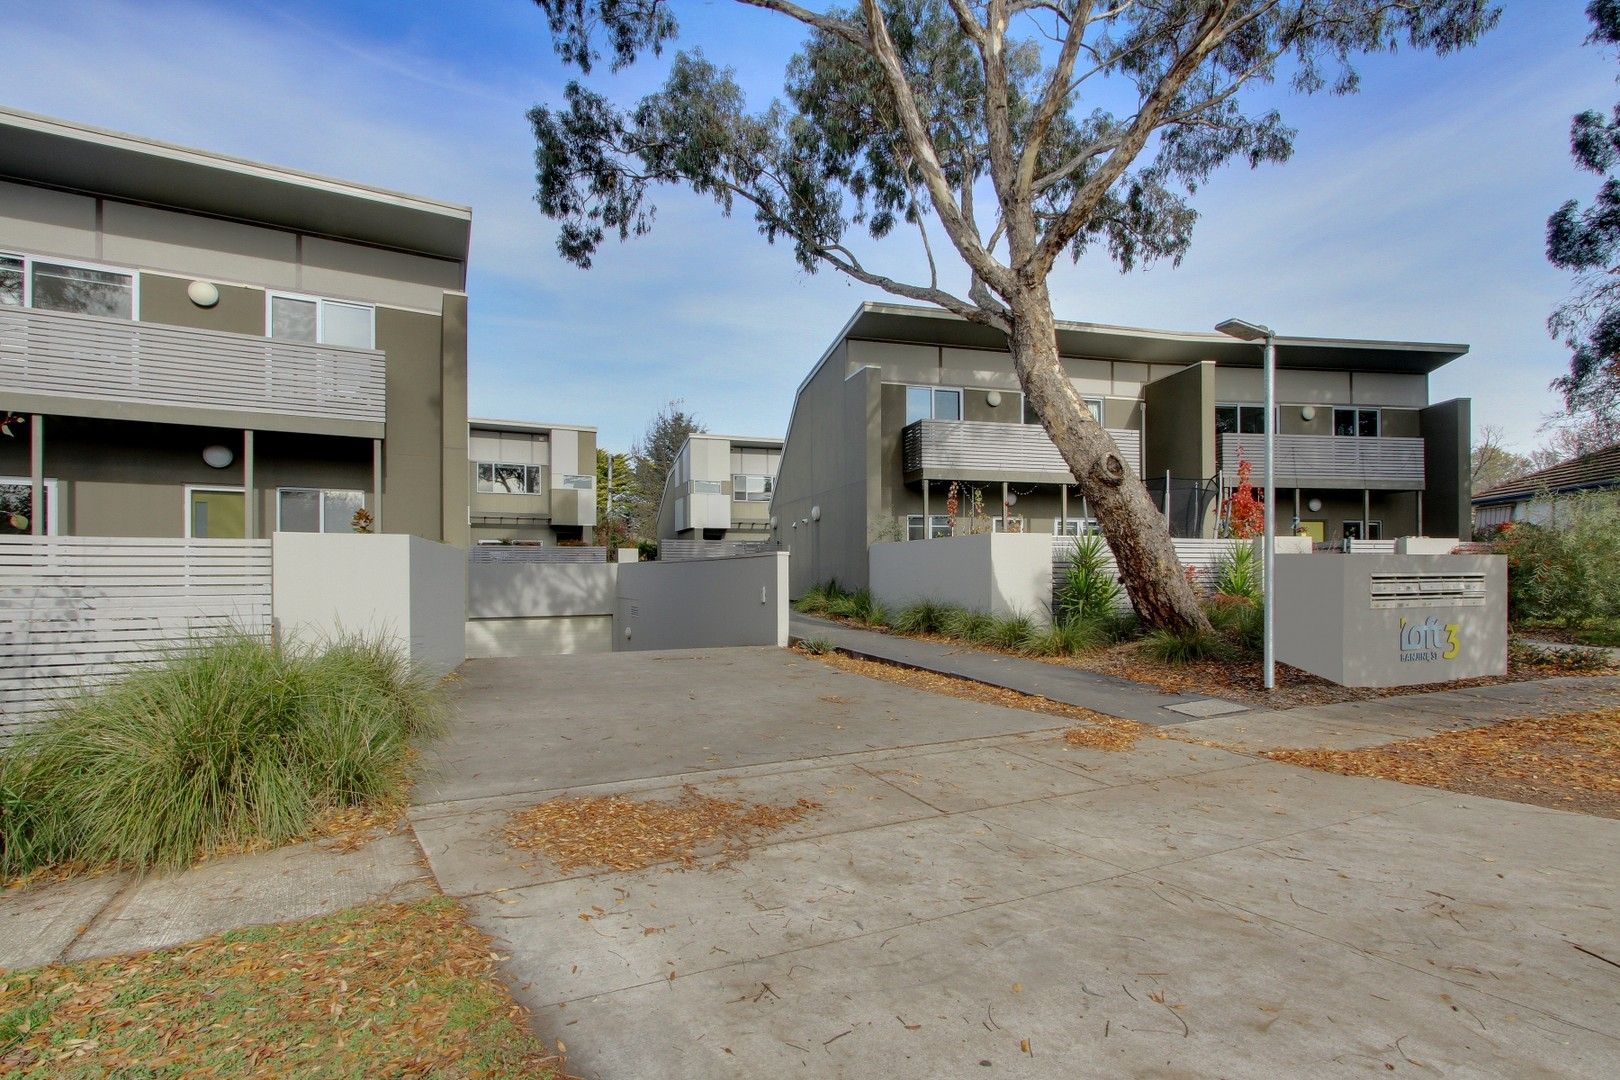 2 bedrooms Townhouse in 12/3 Banjine Street O'CONNOR ACT, 2602